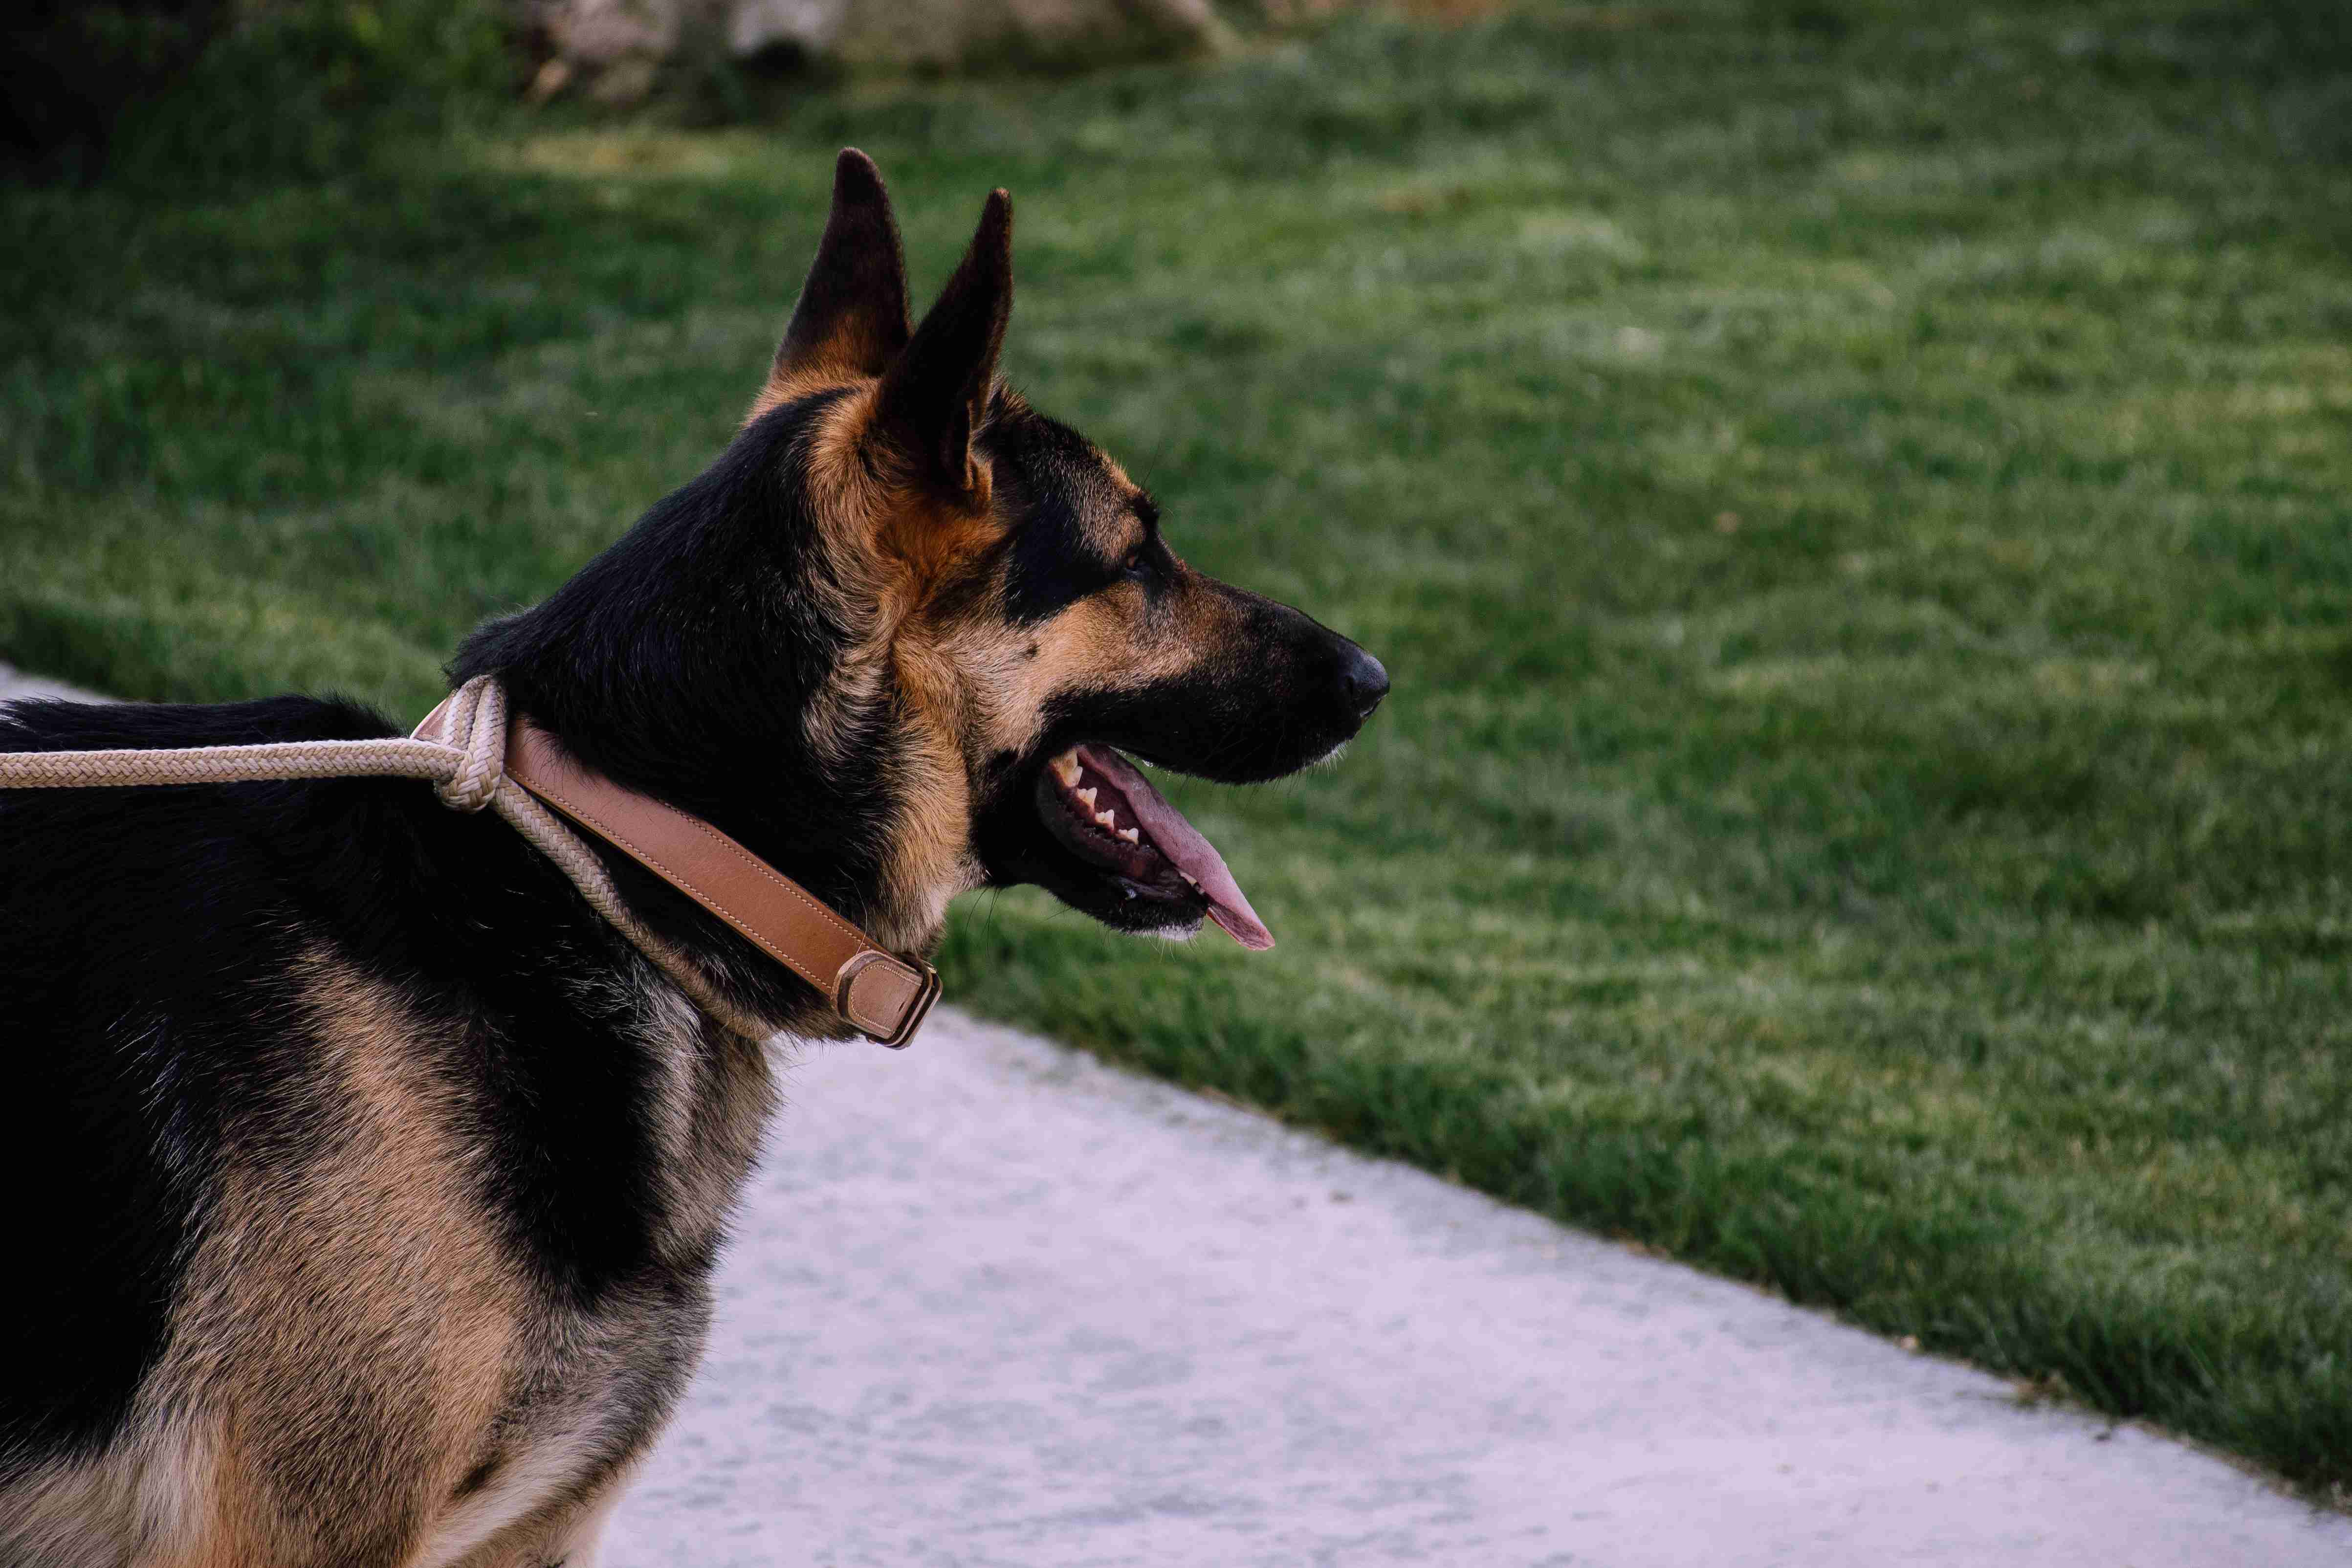 What kind of rewards and treats are best for training a German Shepherd in an apartment?